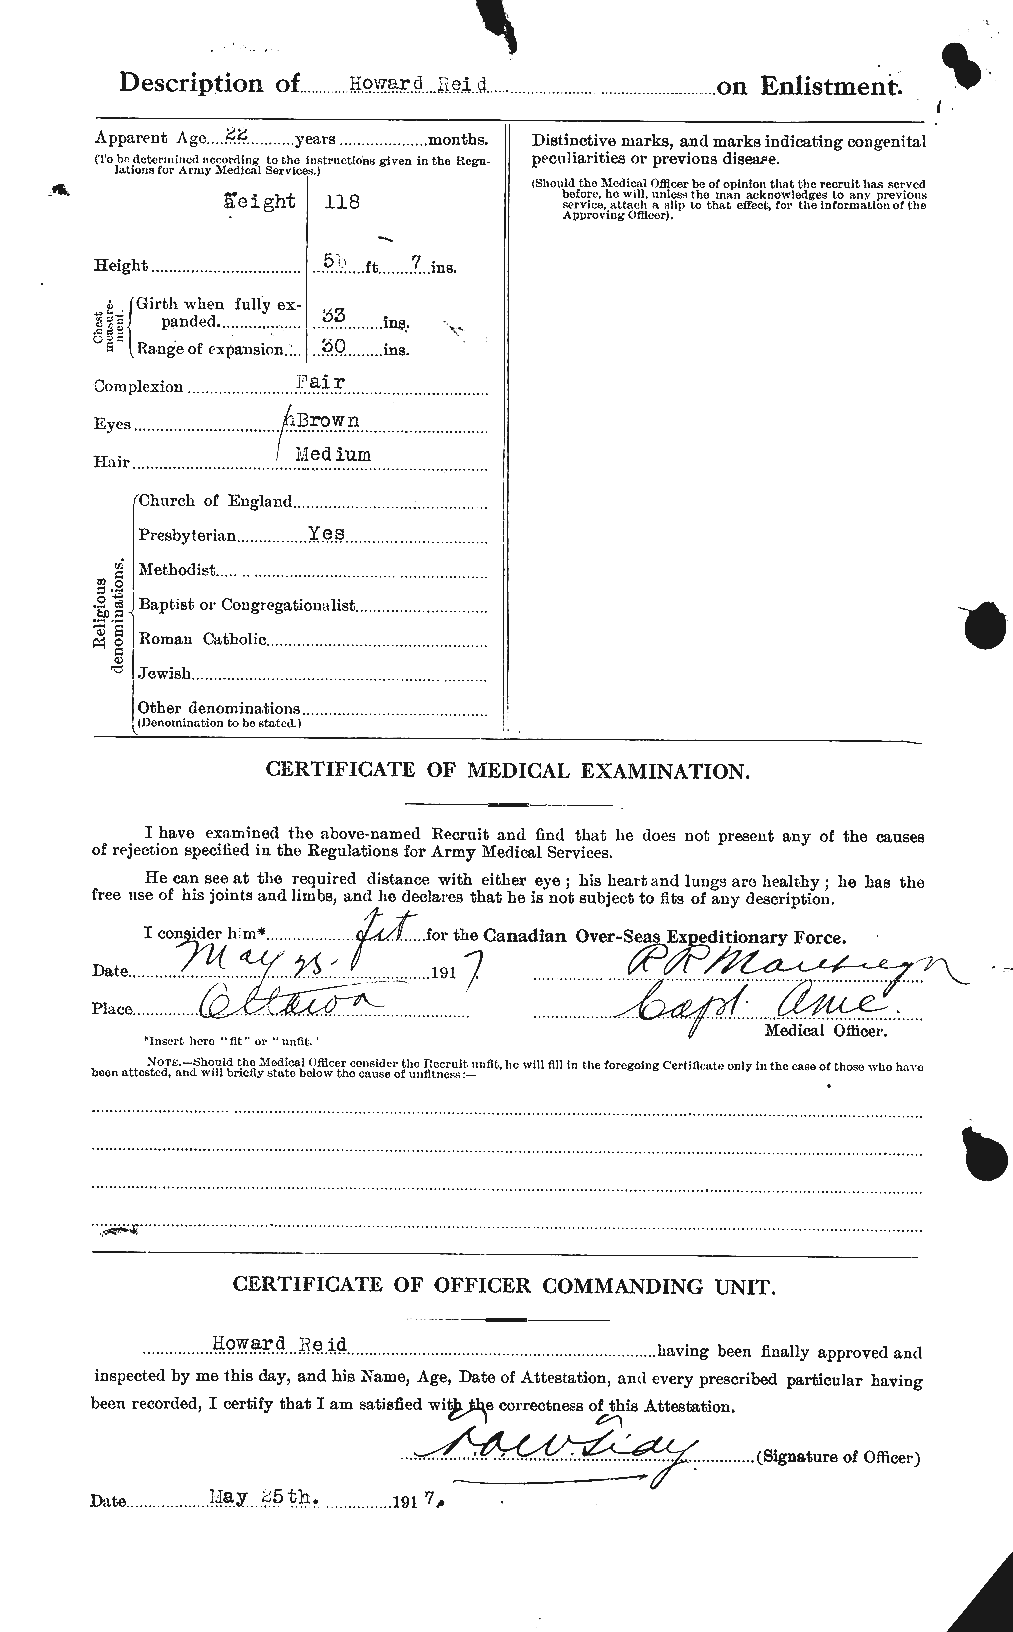 Personnel Records of the First World War - CEF 598617b